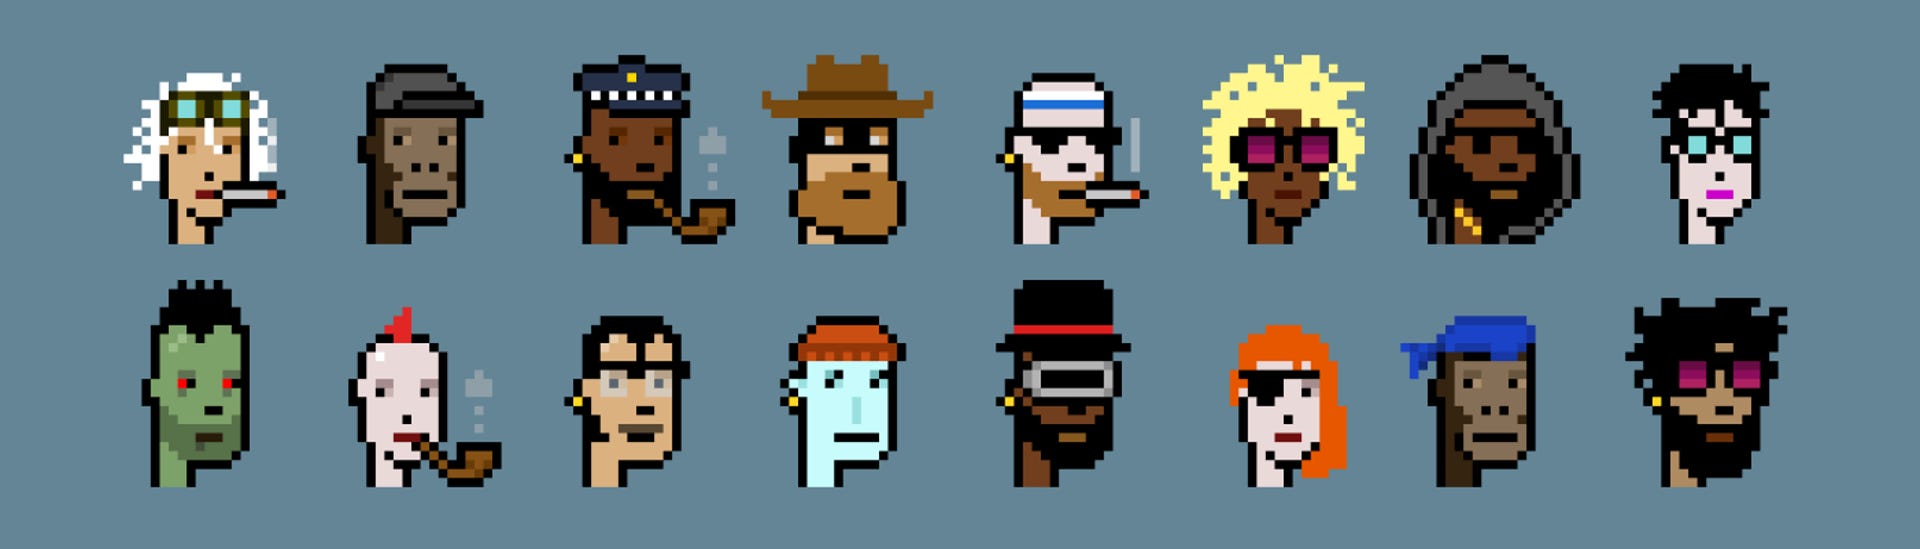 16 of the 10,000 pixelated CryptoPunk NFTs.